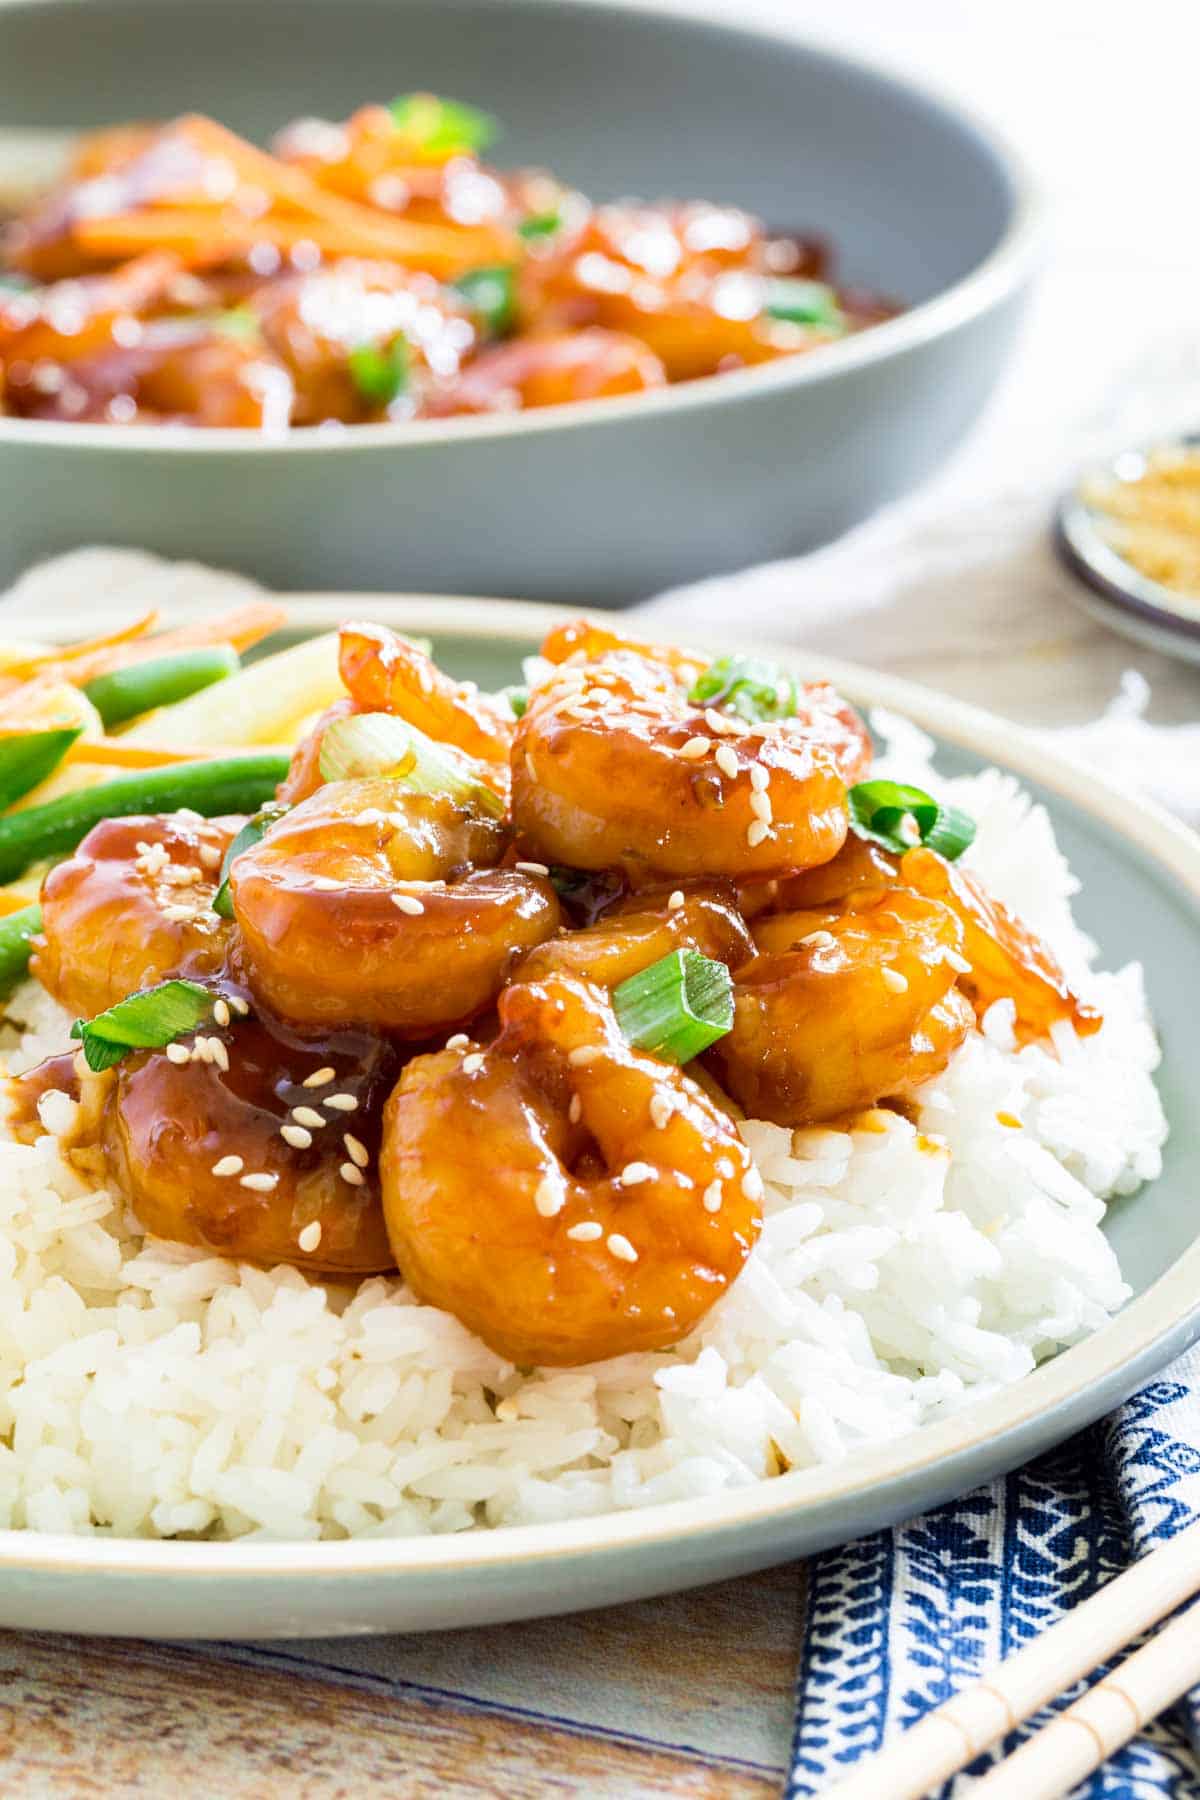 Teriyaki shrimp is shown on a bed of white rice on a plate.